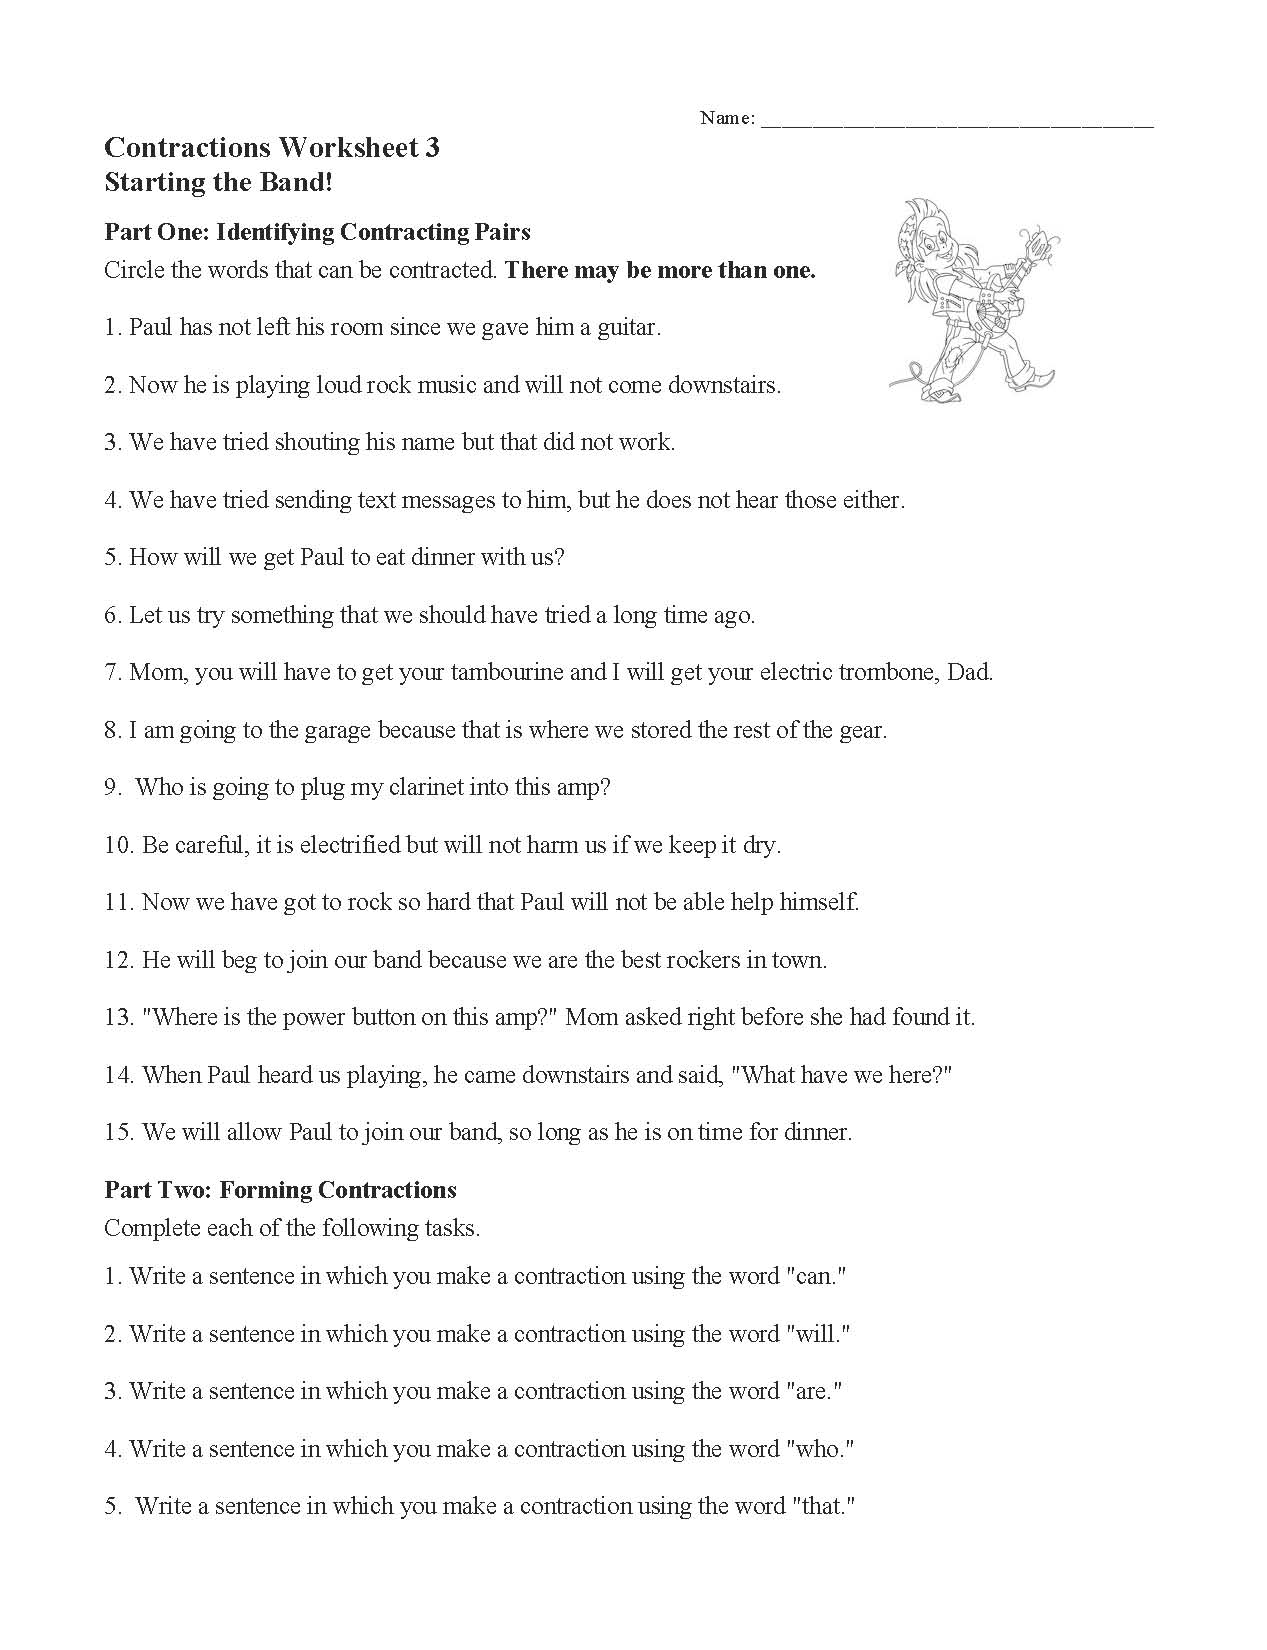 contractions-worksheet-3-preview